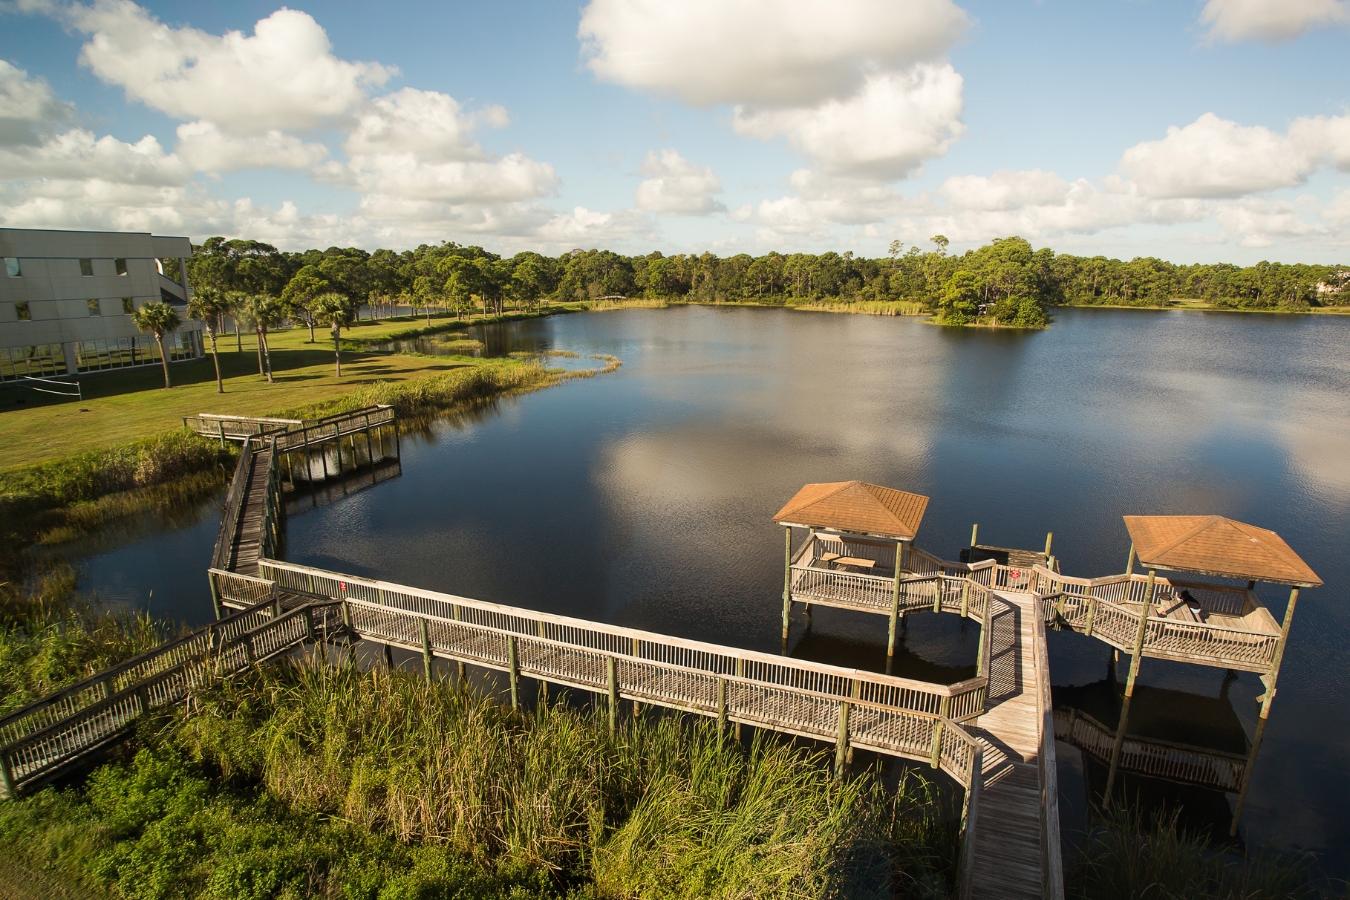 Scenic view of the Palm Bay campus with Lake Titan and its nature board walk in the foreground.